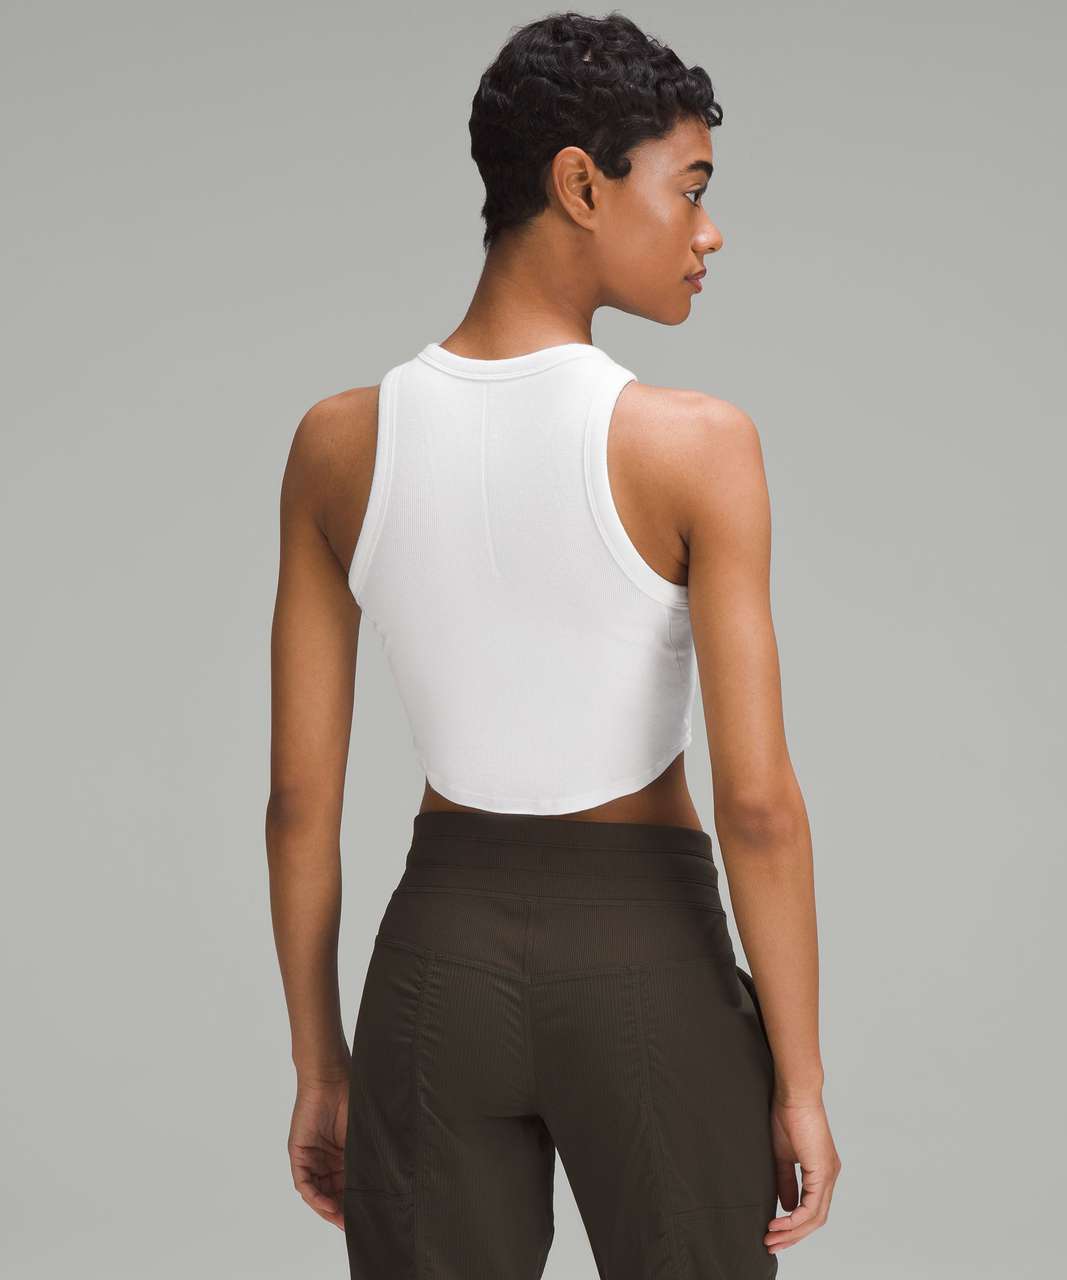 Lululemon Hold Tight Cropped Tank Top - White